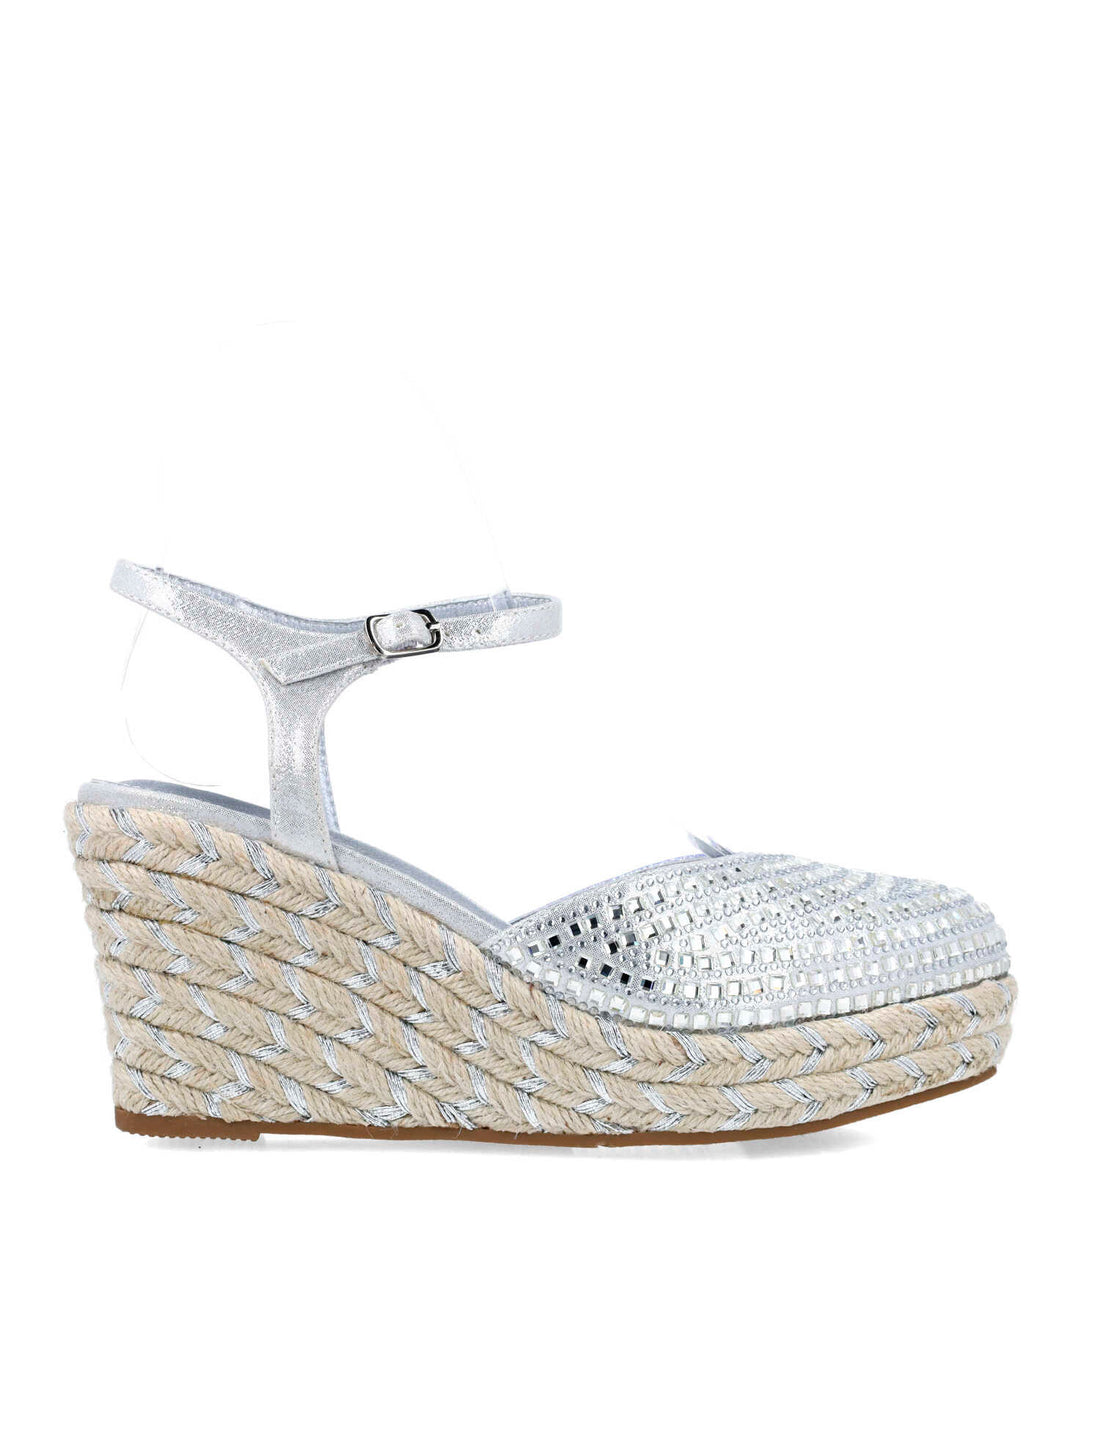 Silver Wedges With Embellishment_24982_09_01